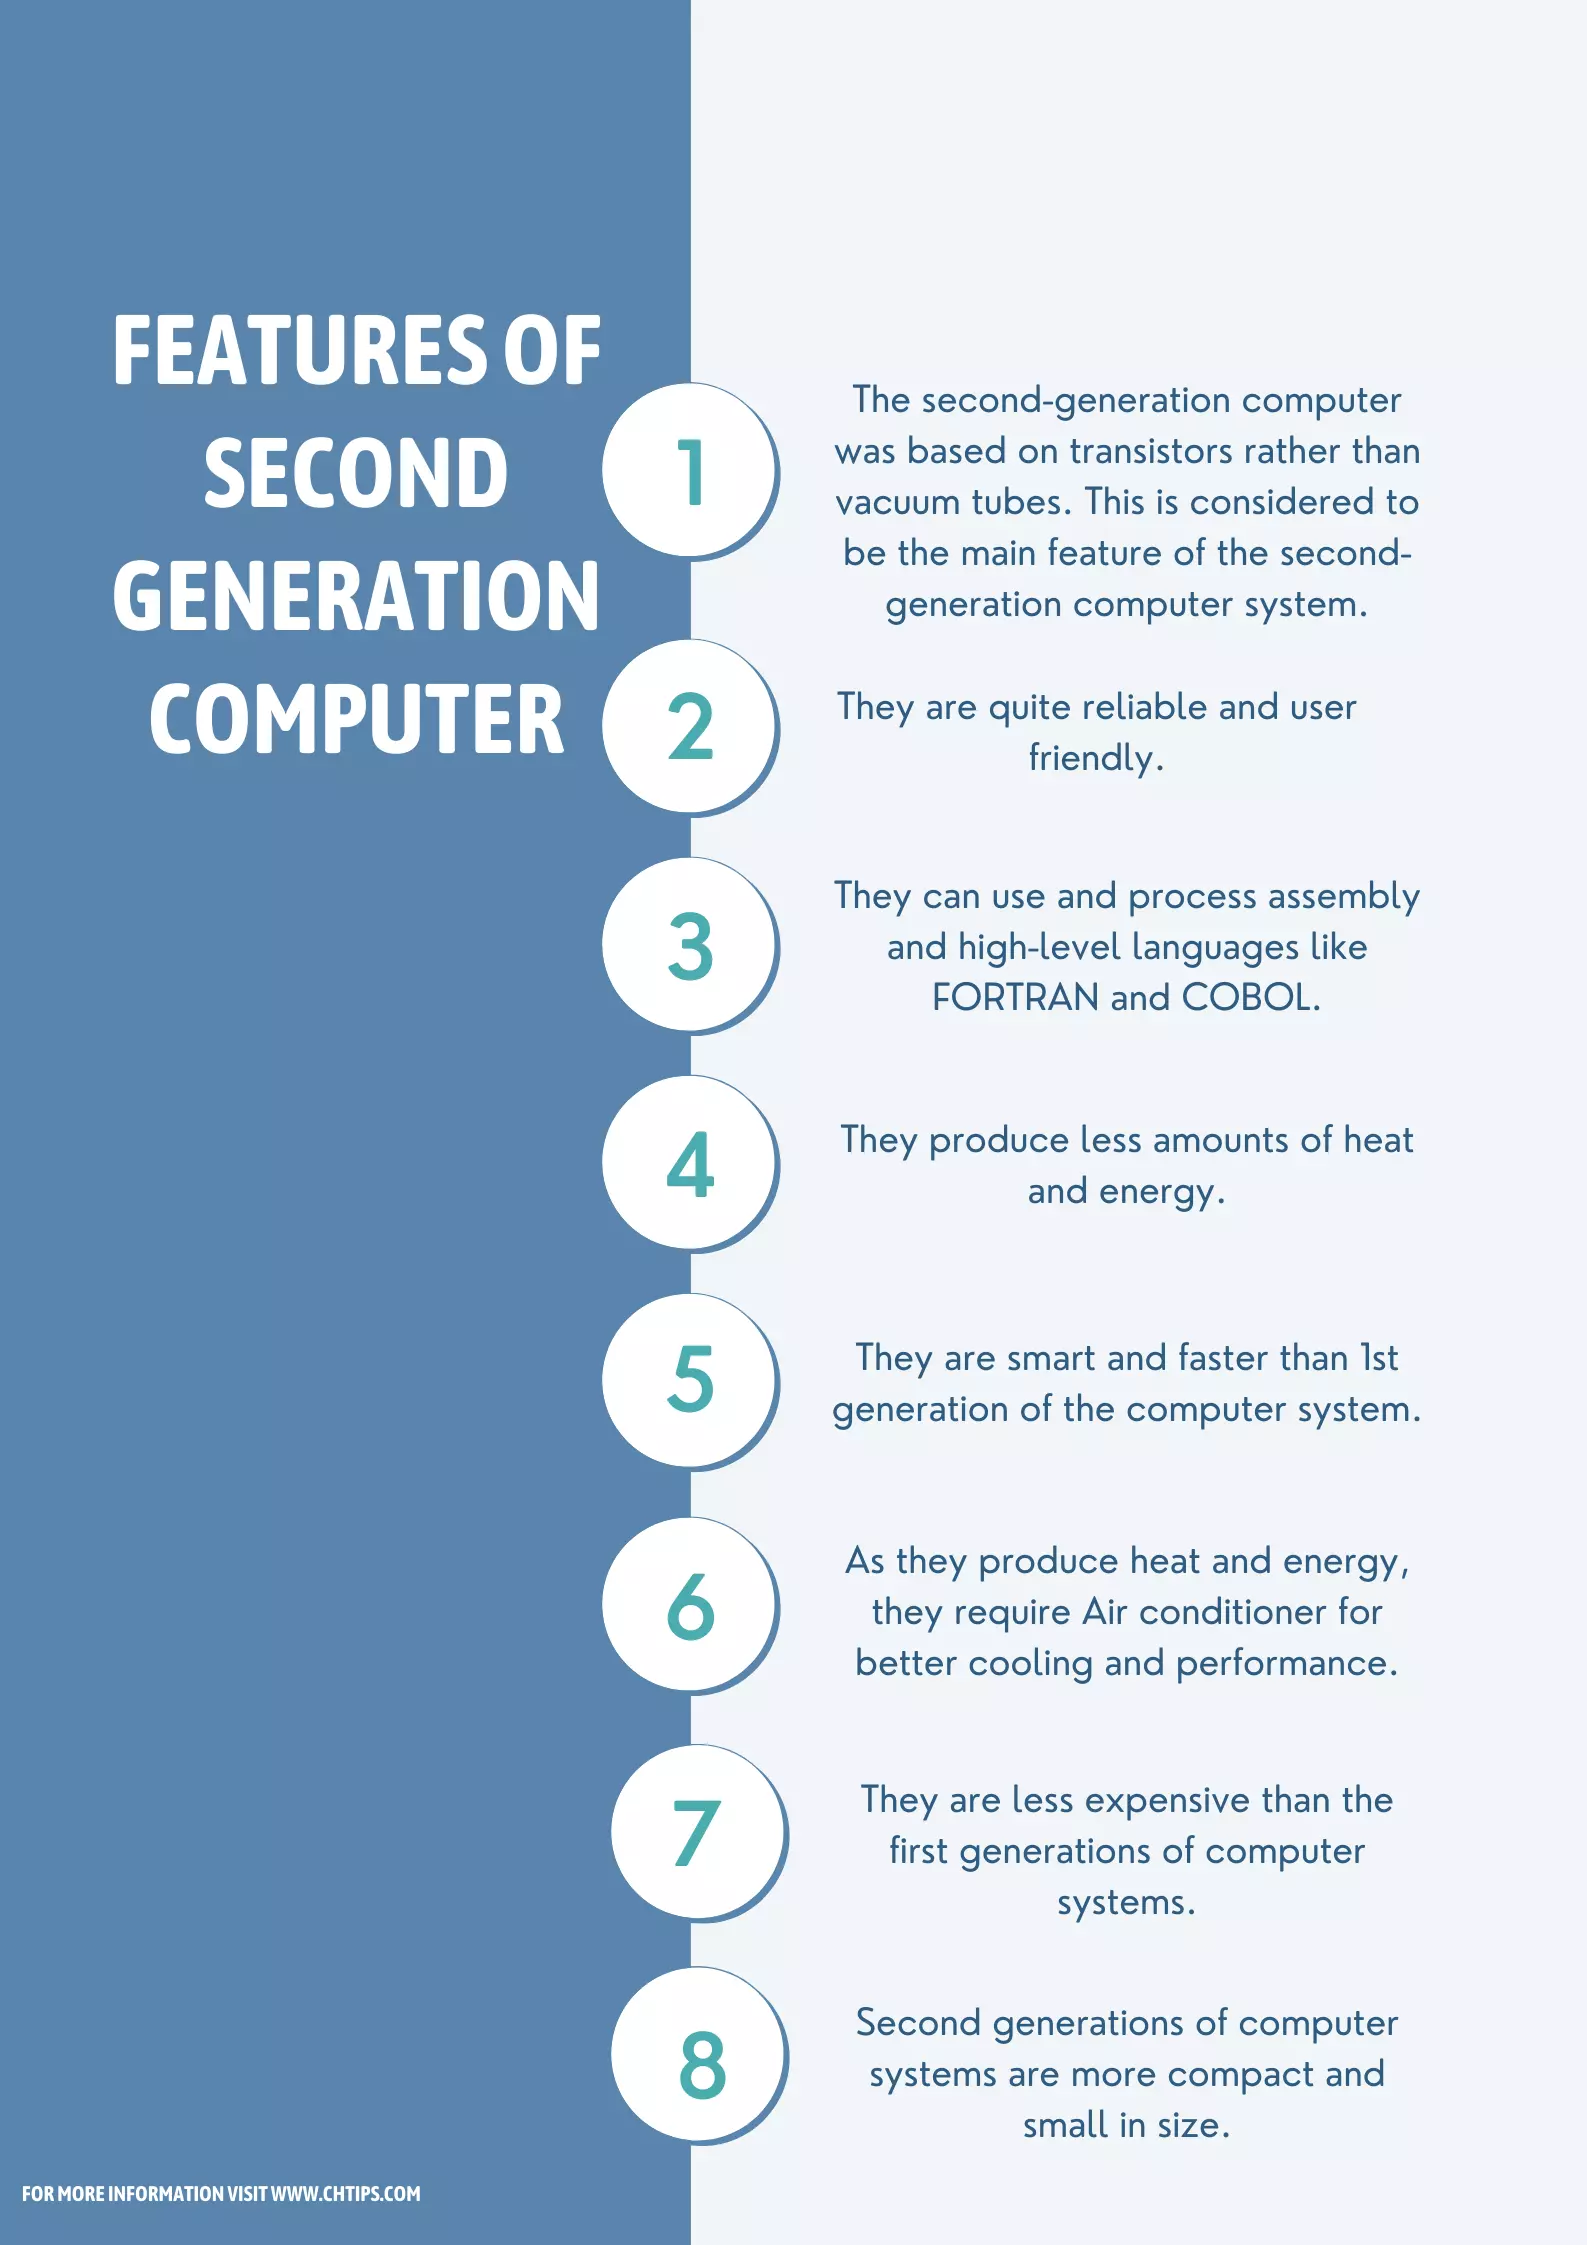 Characteristics and Features of Second Generations of Computer System